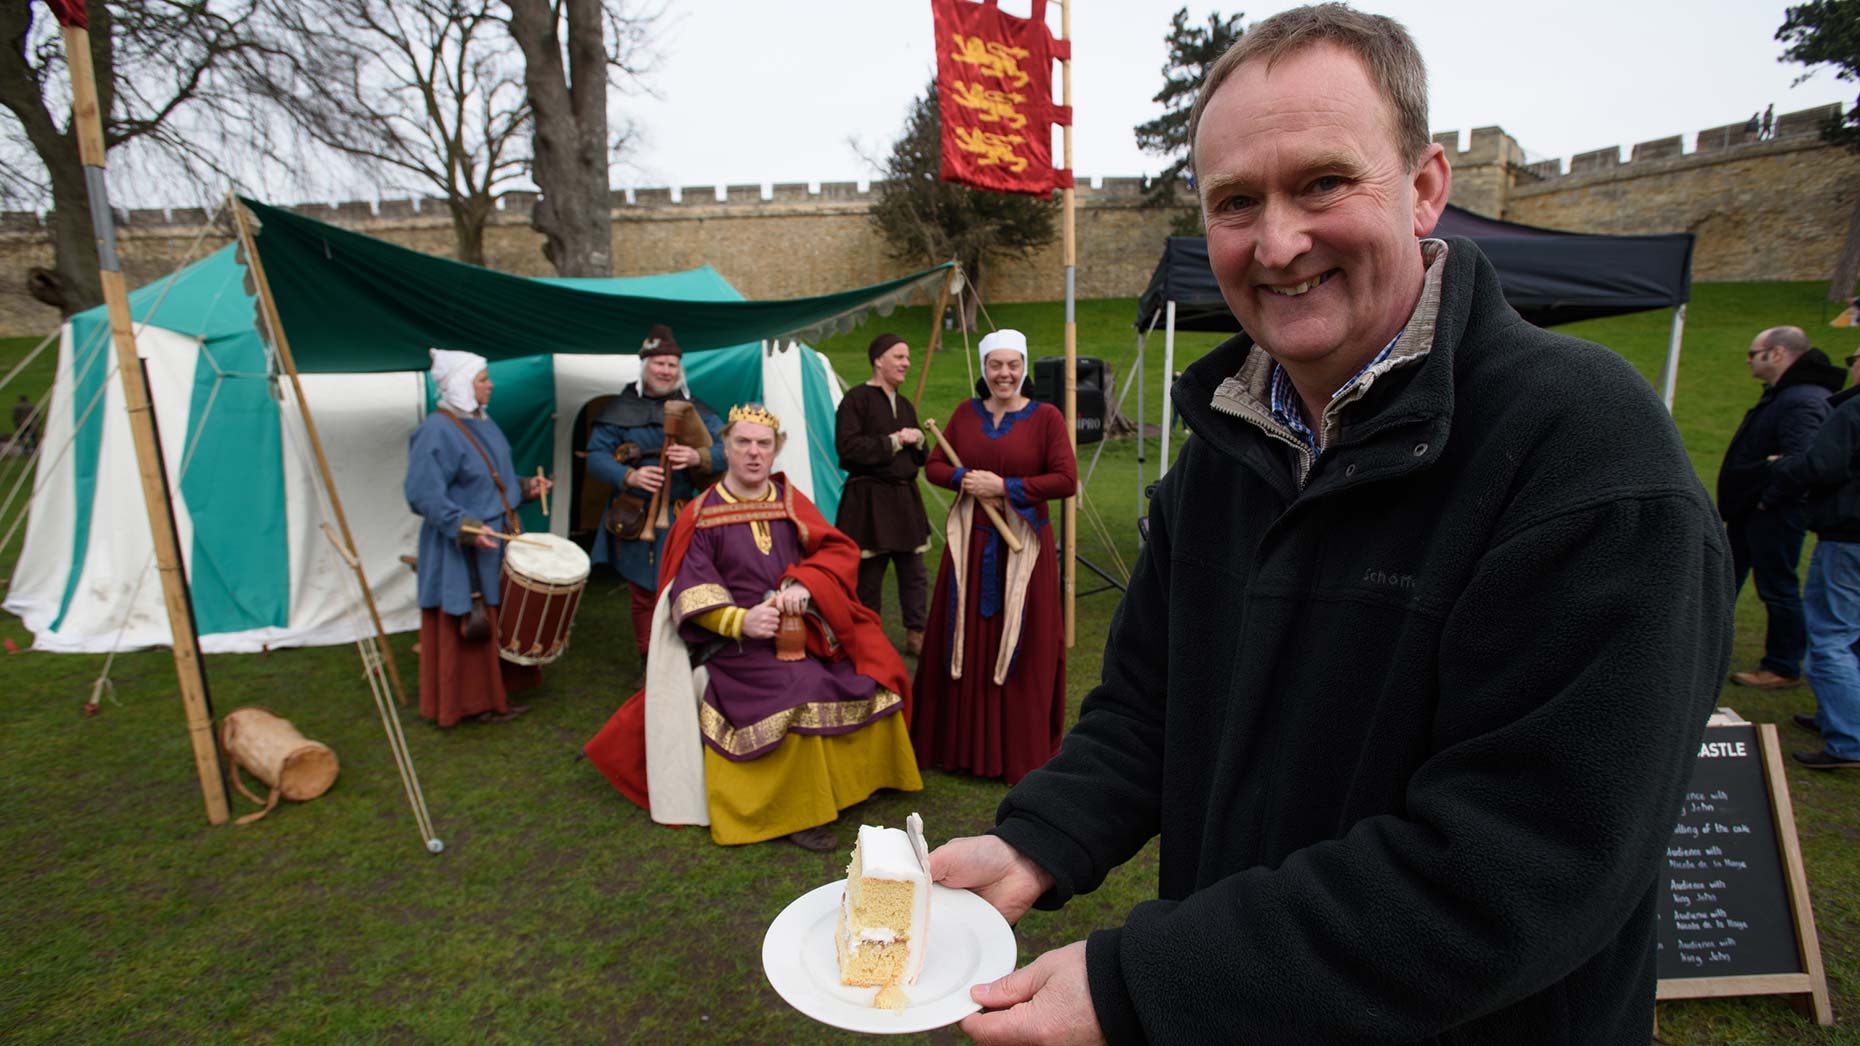 Councillor Nick Worth, Executive Member for Culture and Heritage. Photo: Steve Smailes for The Lincolnite